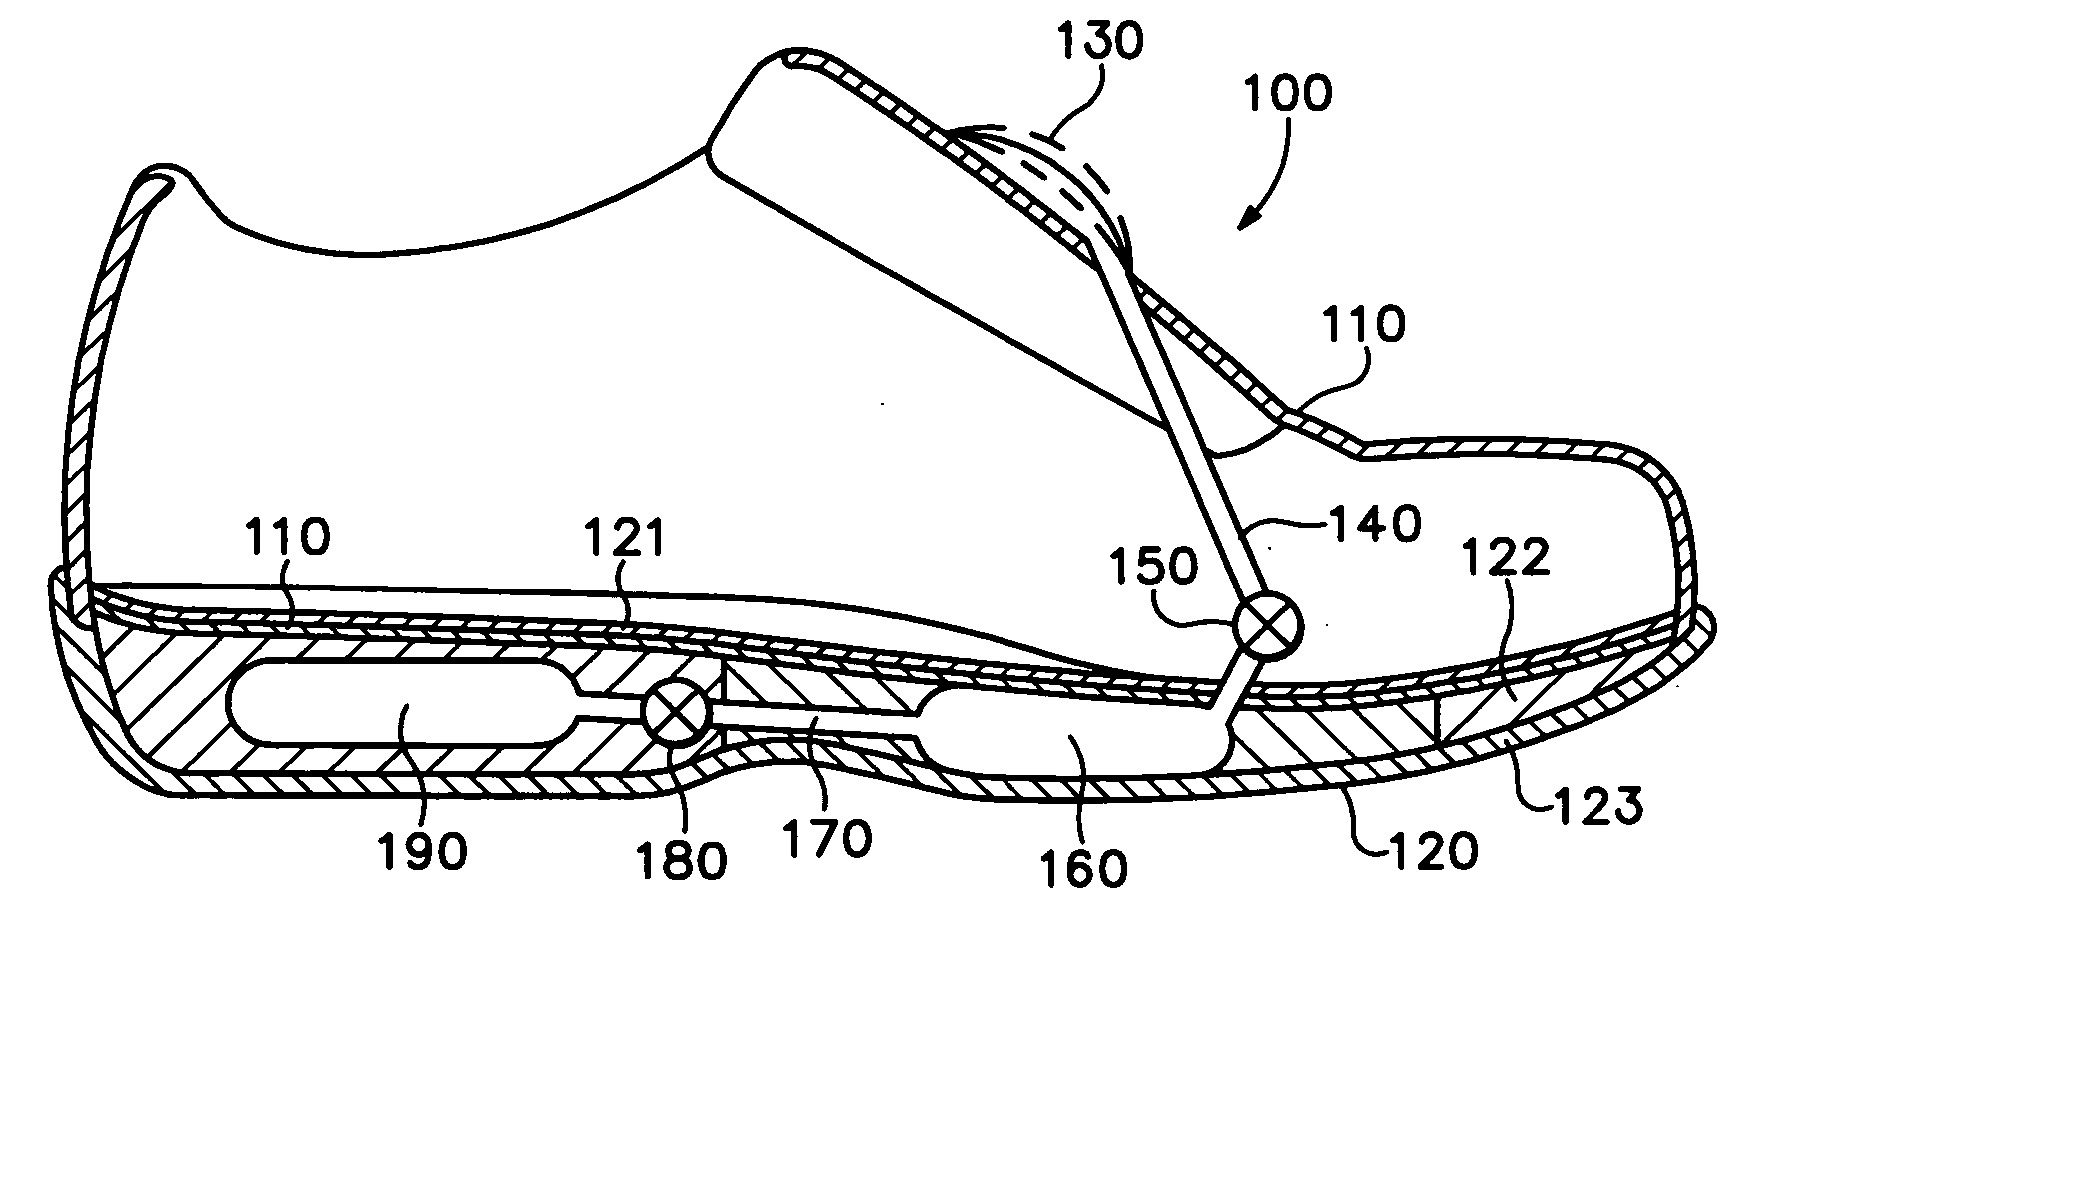 Article of footwear incorporating a fluid system